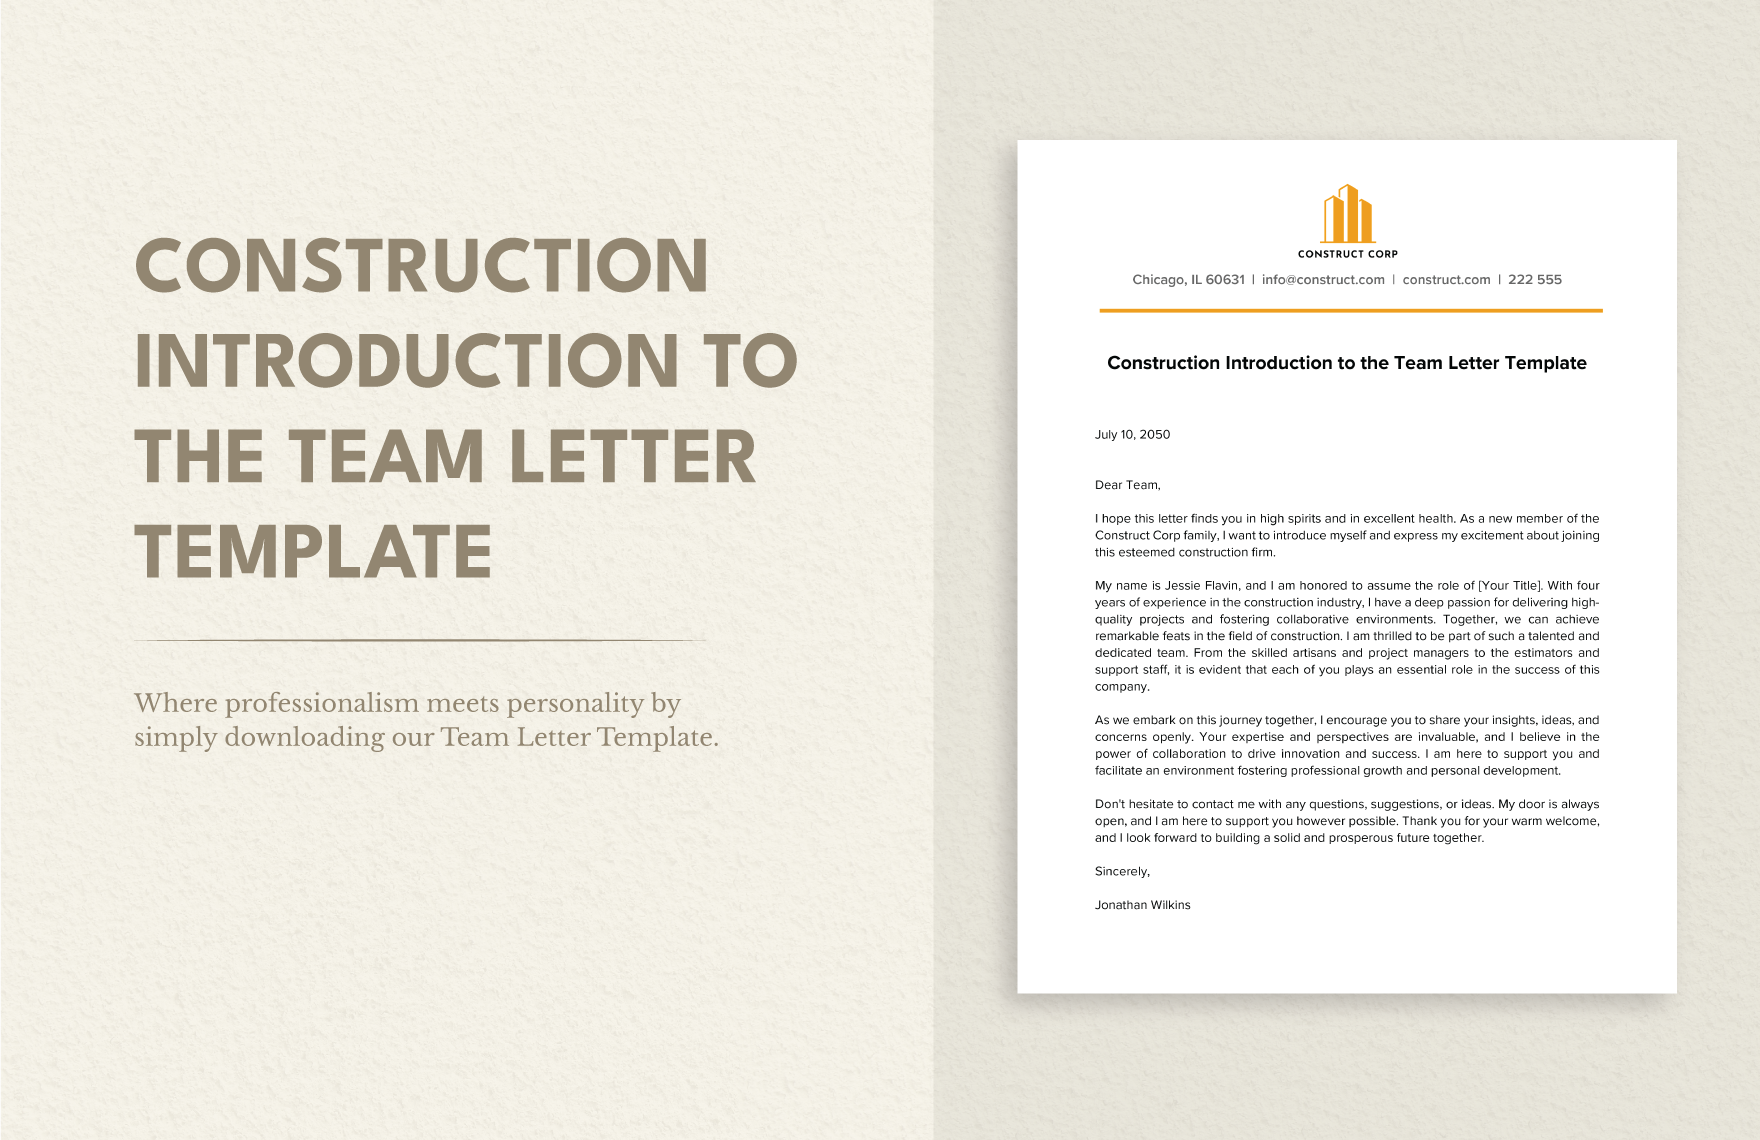 Construction Introduction to the Team Letter Template